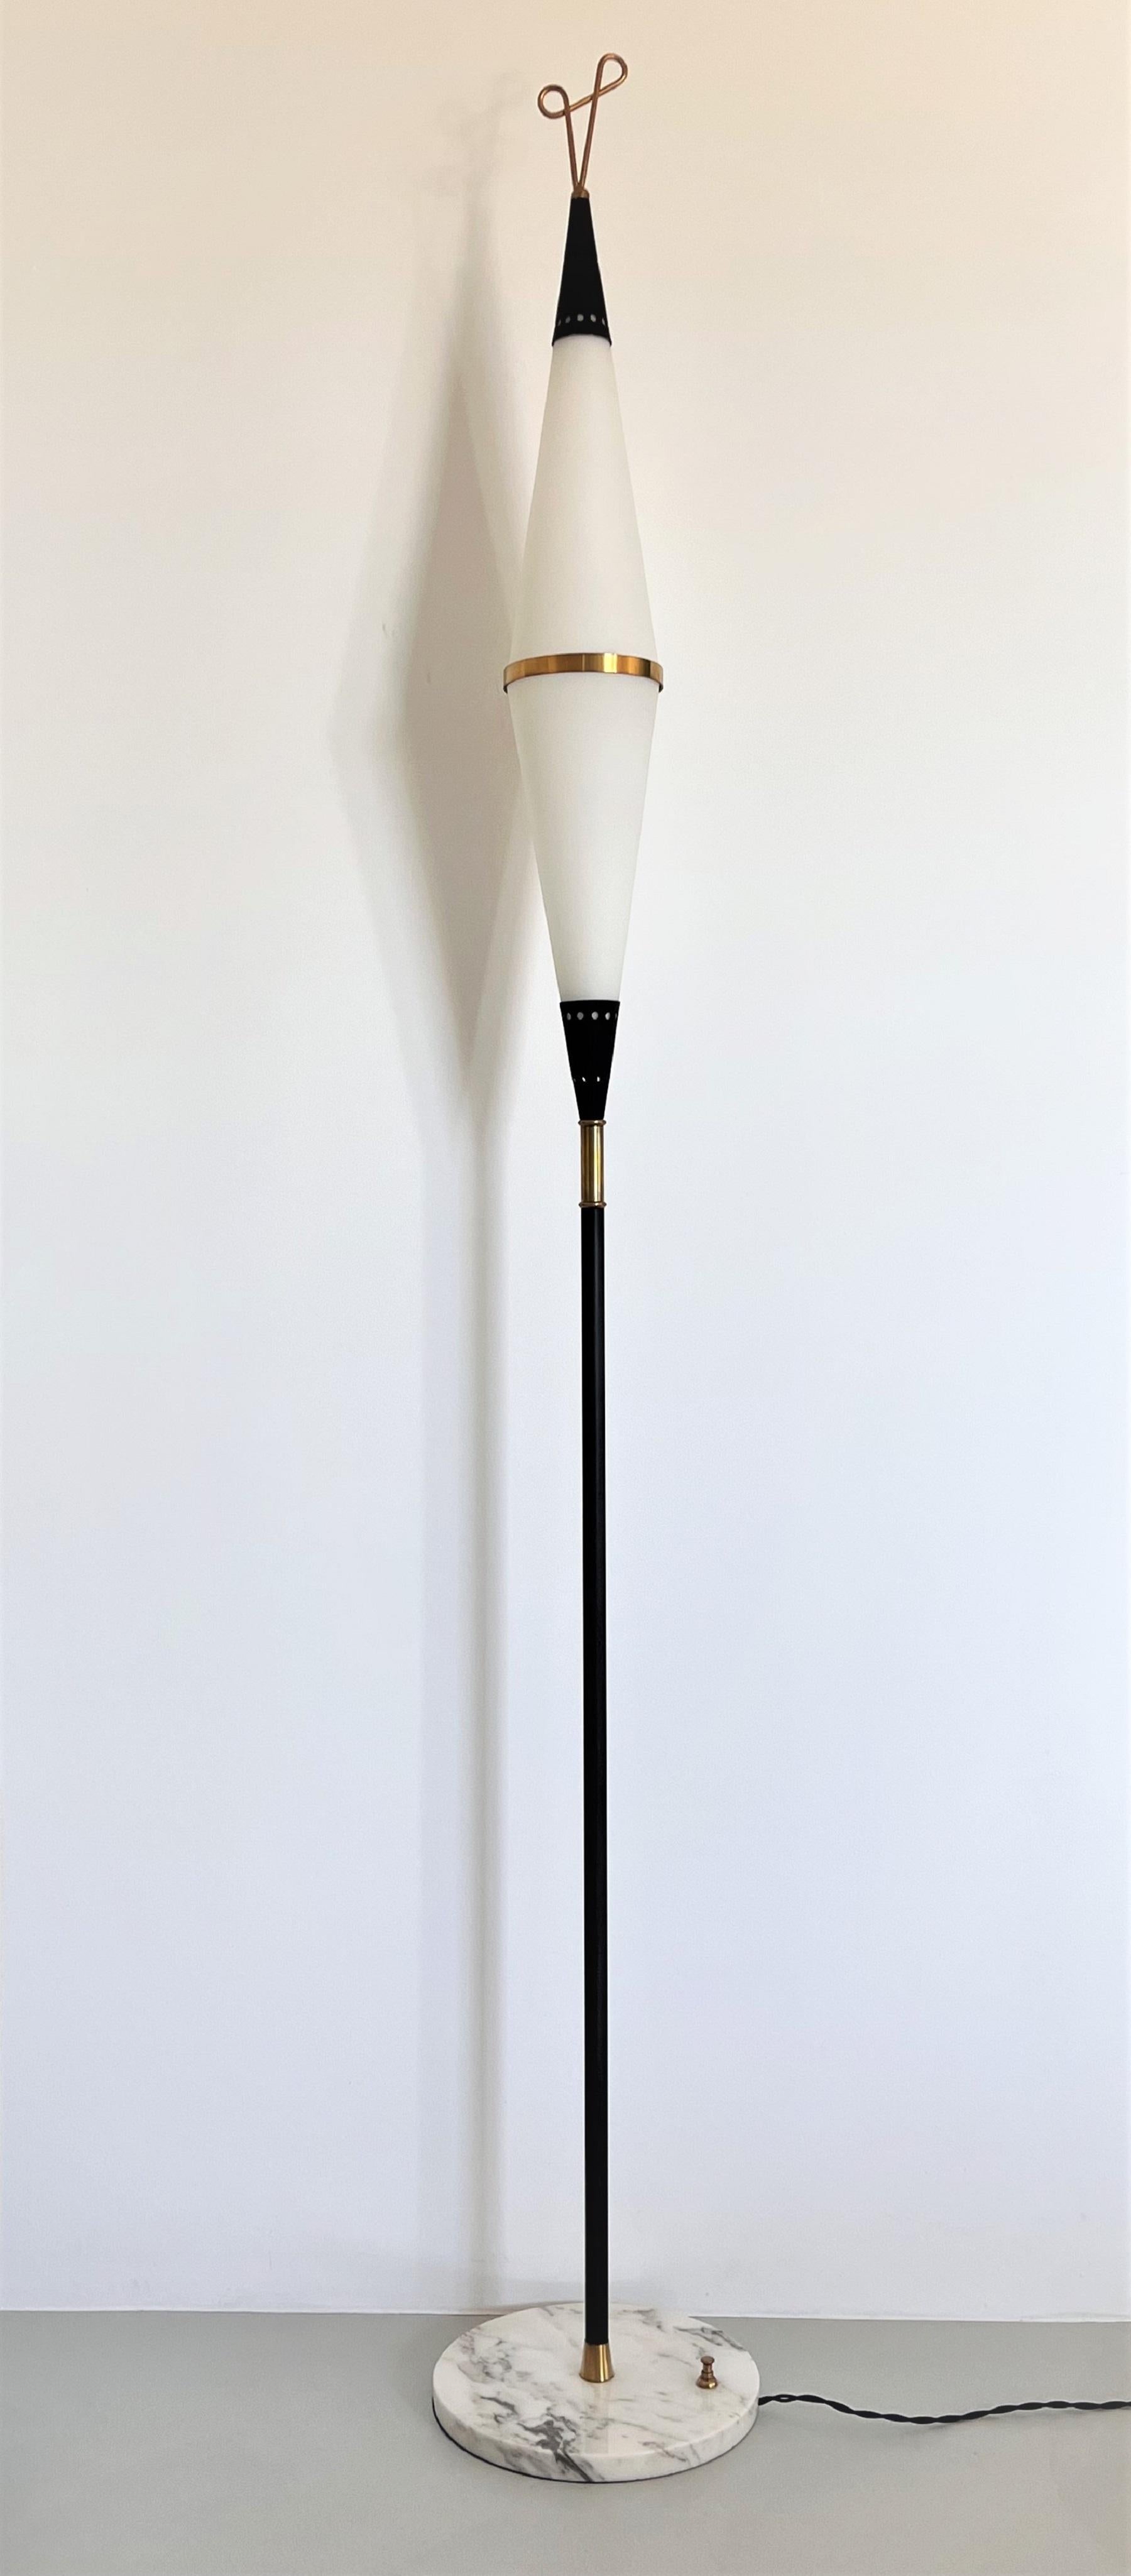 Italian Midcentury Floor Lamp in Glass, Brass and Marble by Reggiani, 1960s For Sale 8